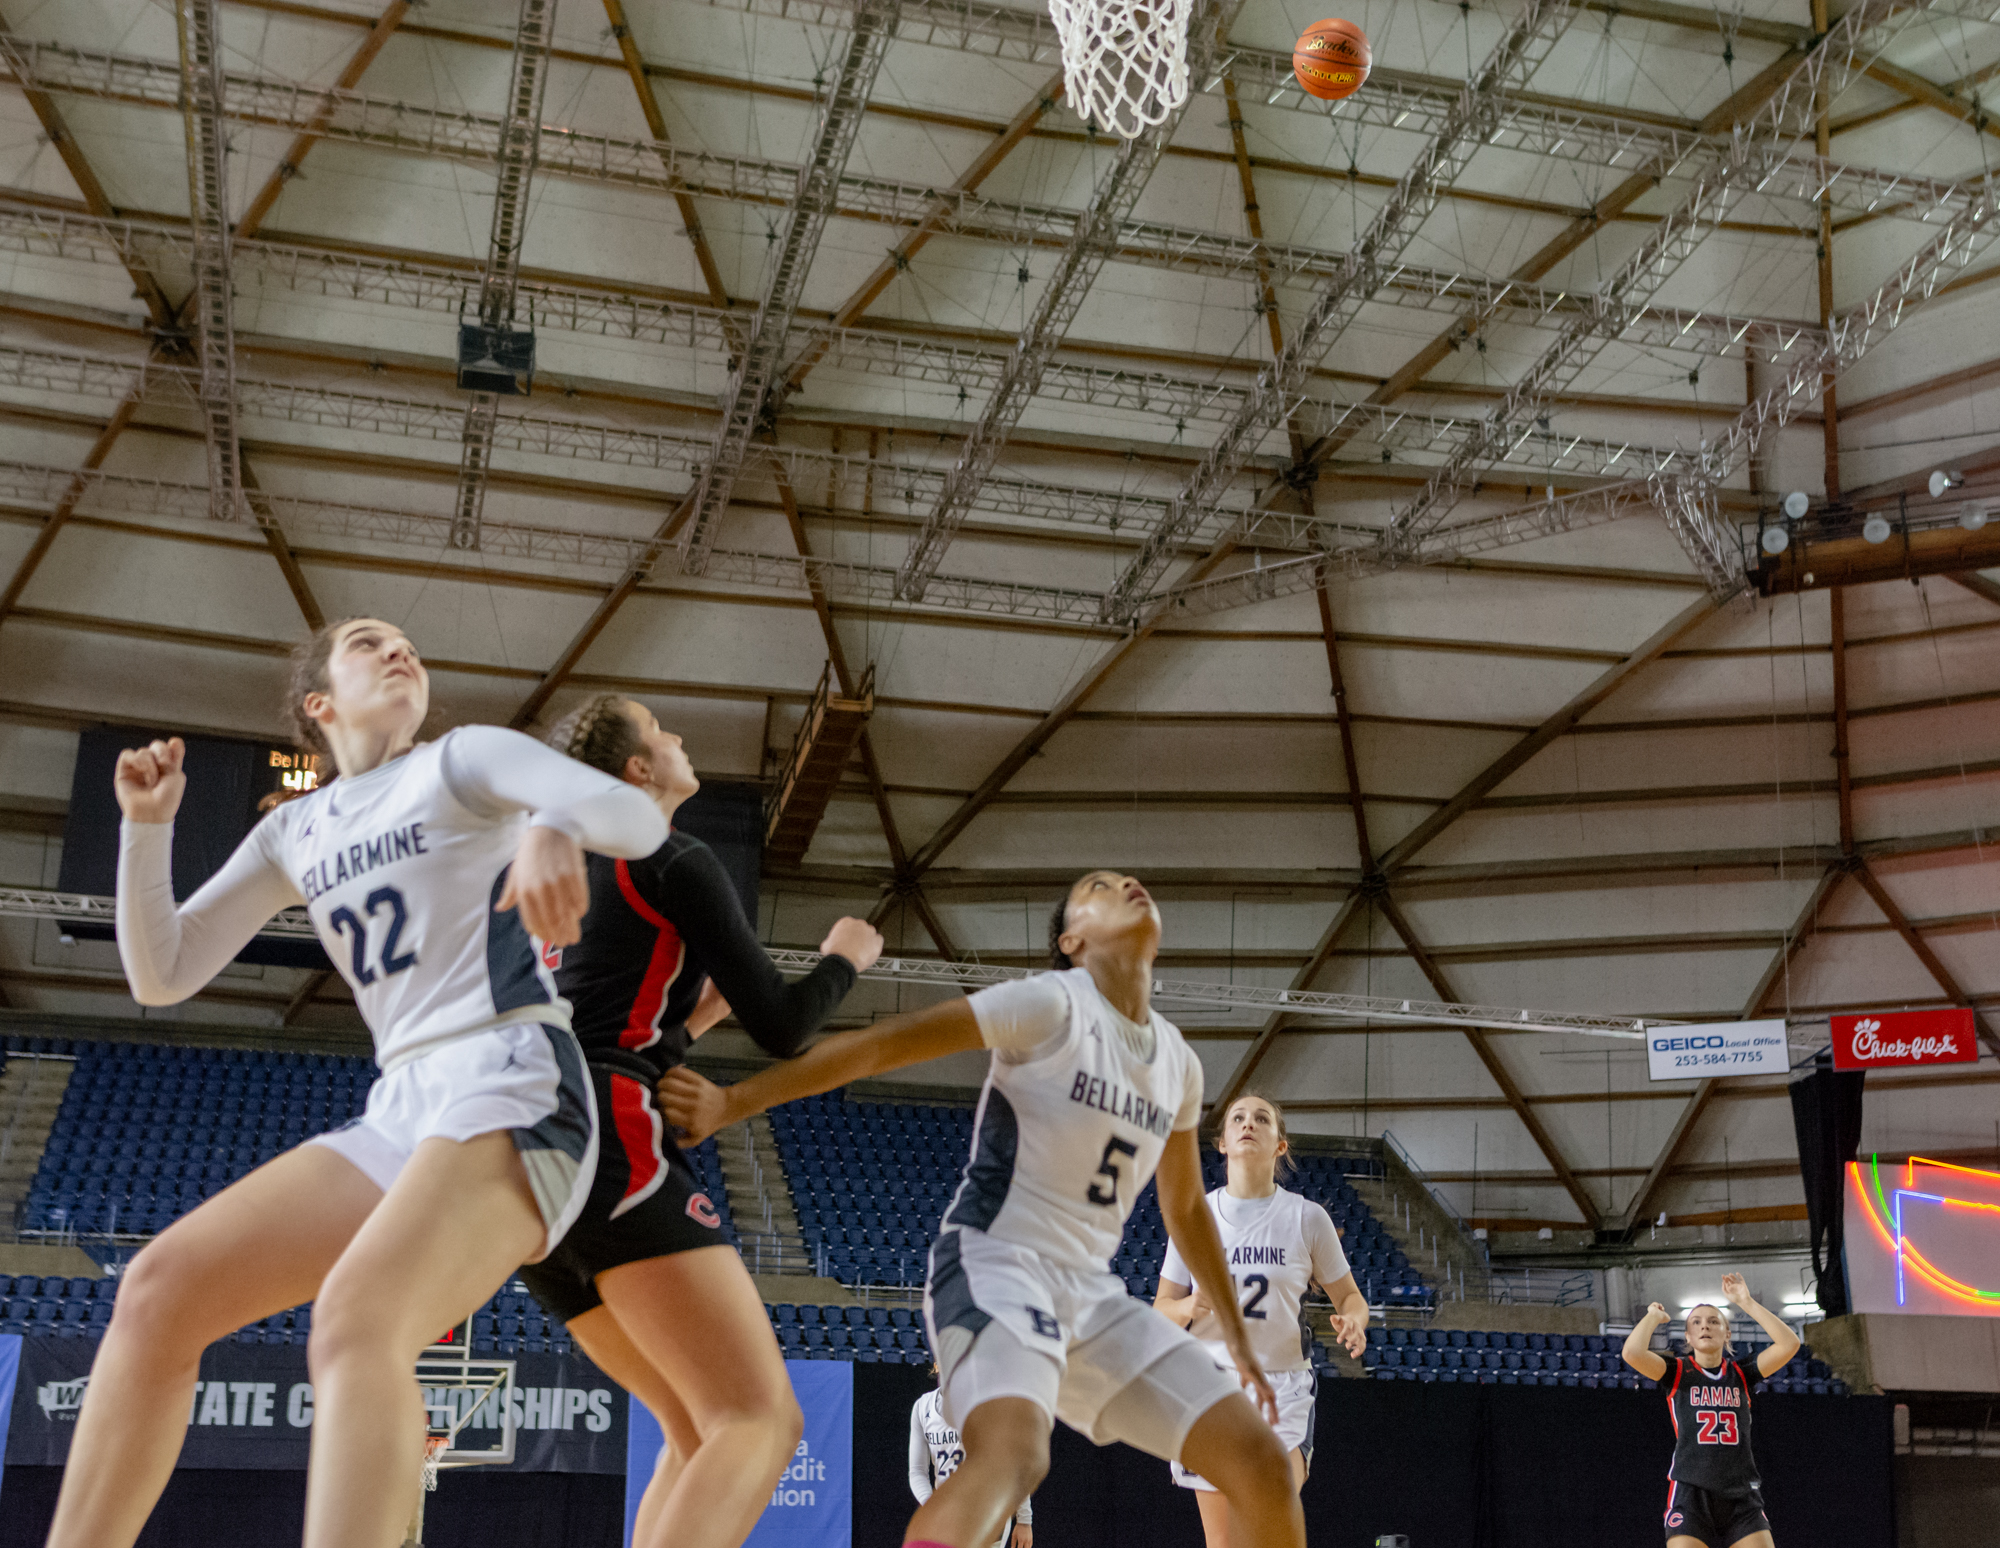 Players fight for position as Camas' Riley Sanz's 3-pointer comes up short in the 4A State Girls Basketball tournament on Wednesday, March 2, 2022, at the Tacoma Dome.